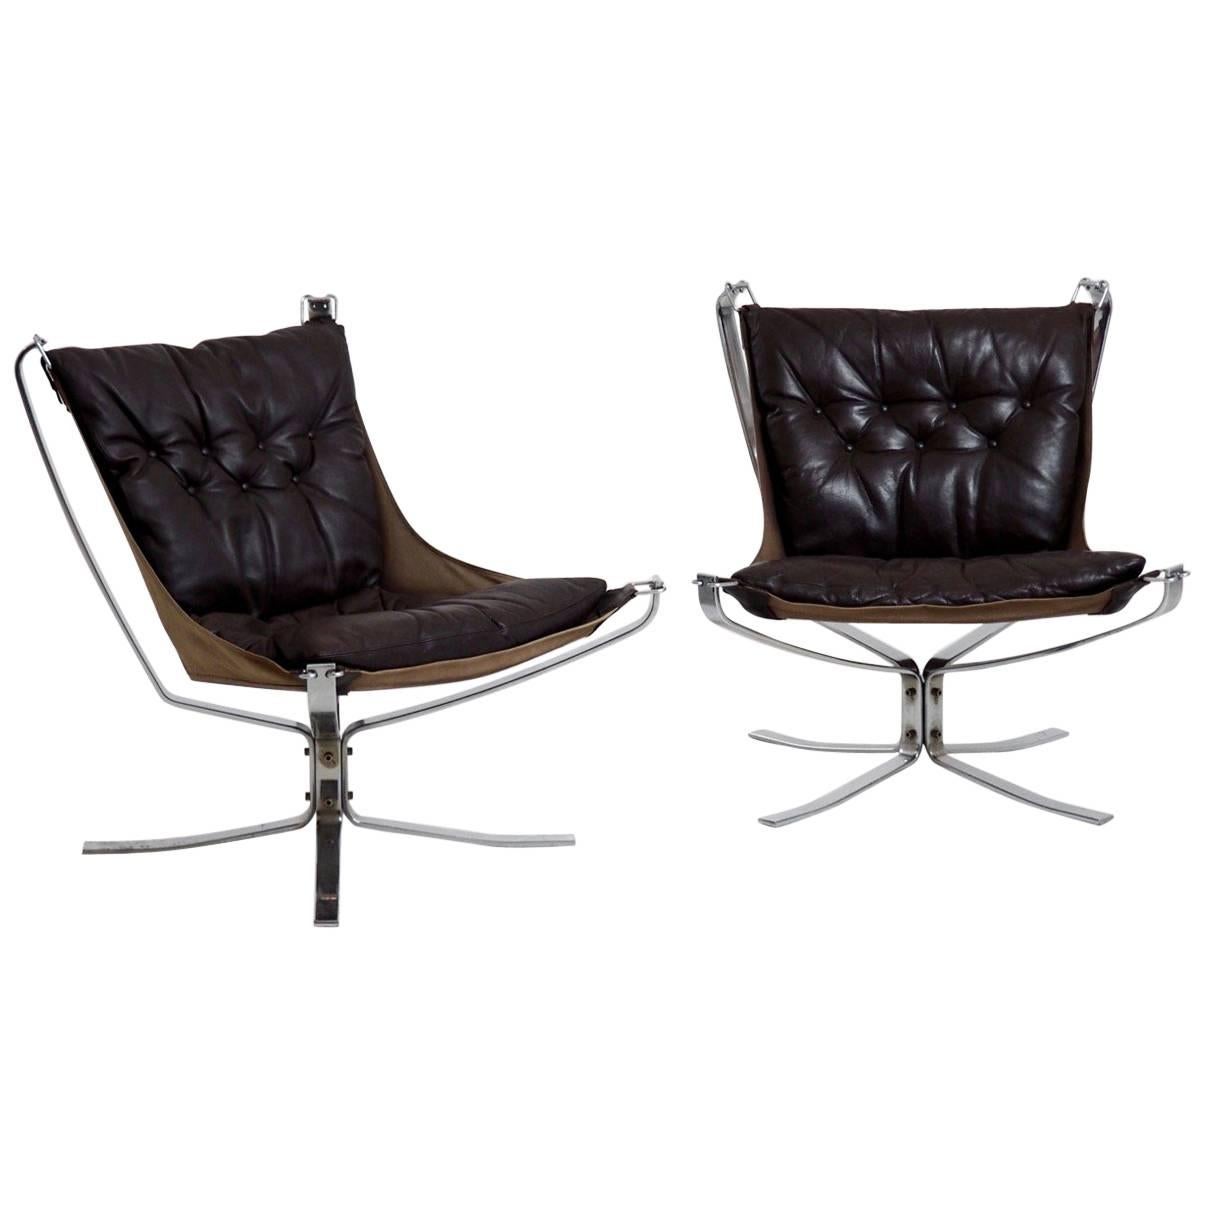 Set of Two Falcon Chairs by Sigurd Resell for Vatne Møbler in Sweden